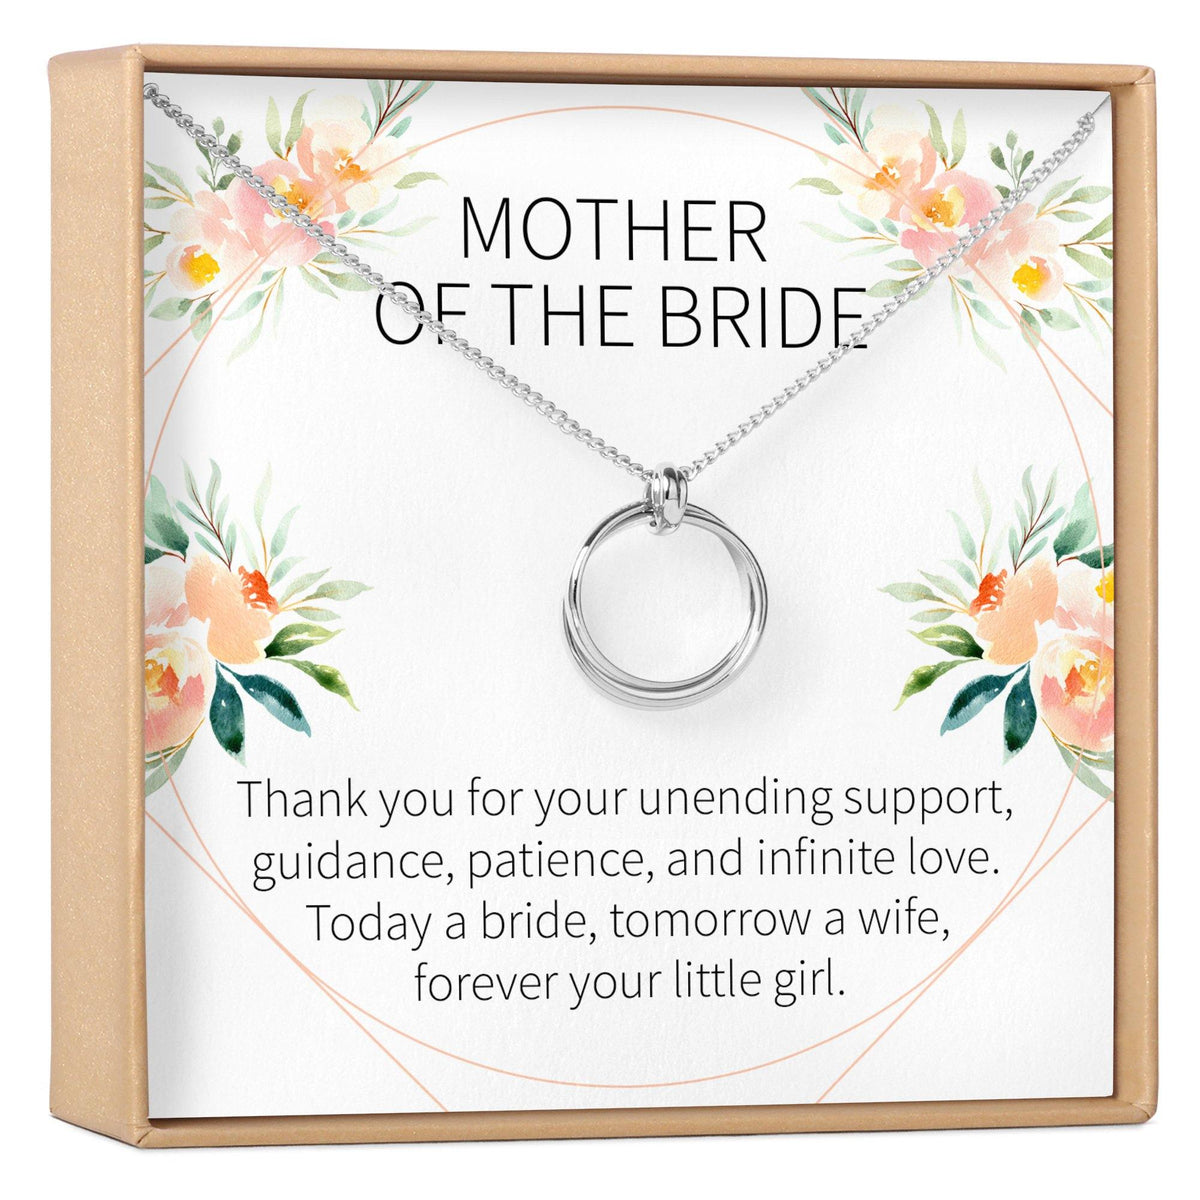 Mother of the Bride Necklace - Dear Ava, Jewelry / Necklaces / Pendants